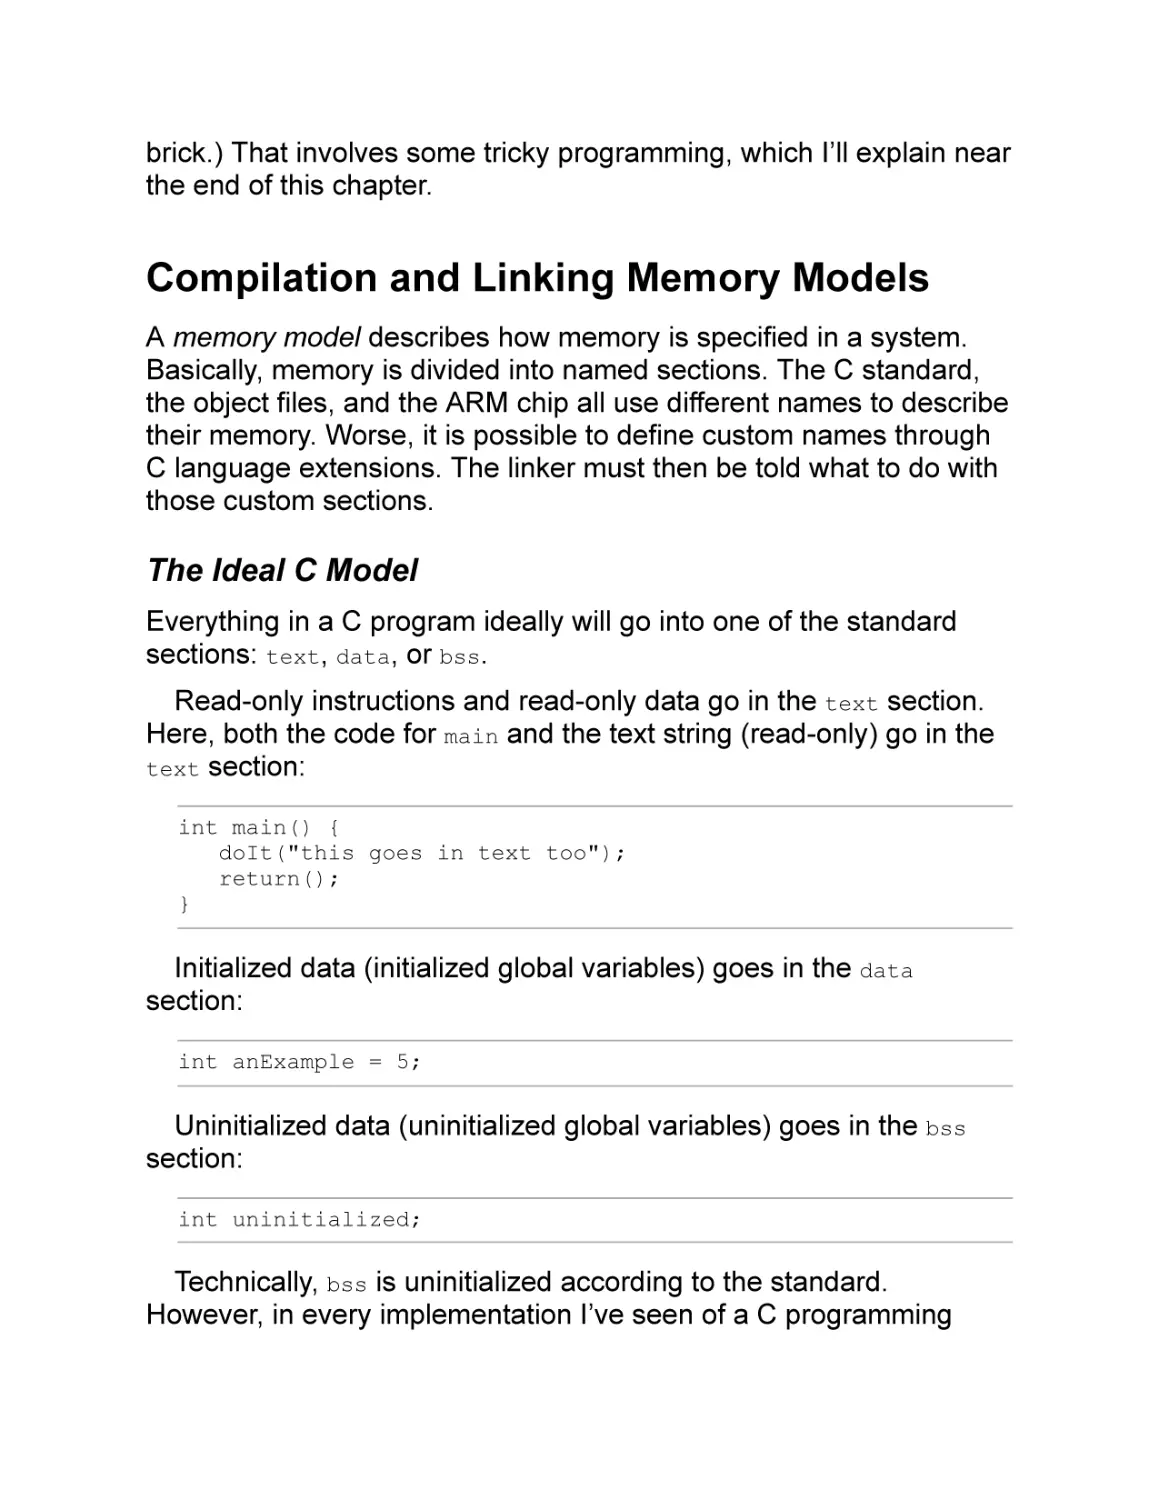 Compilation and Linking Memory Models
The Ideal C Model